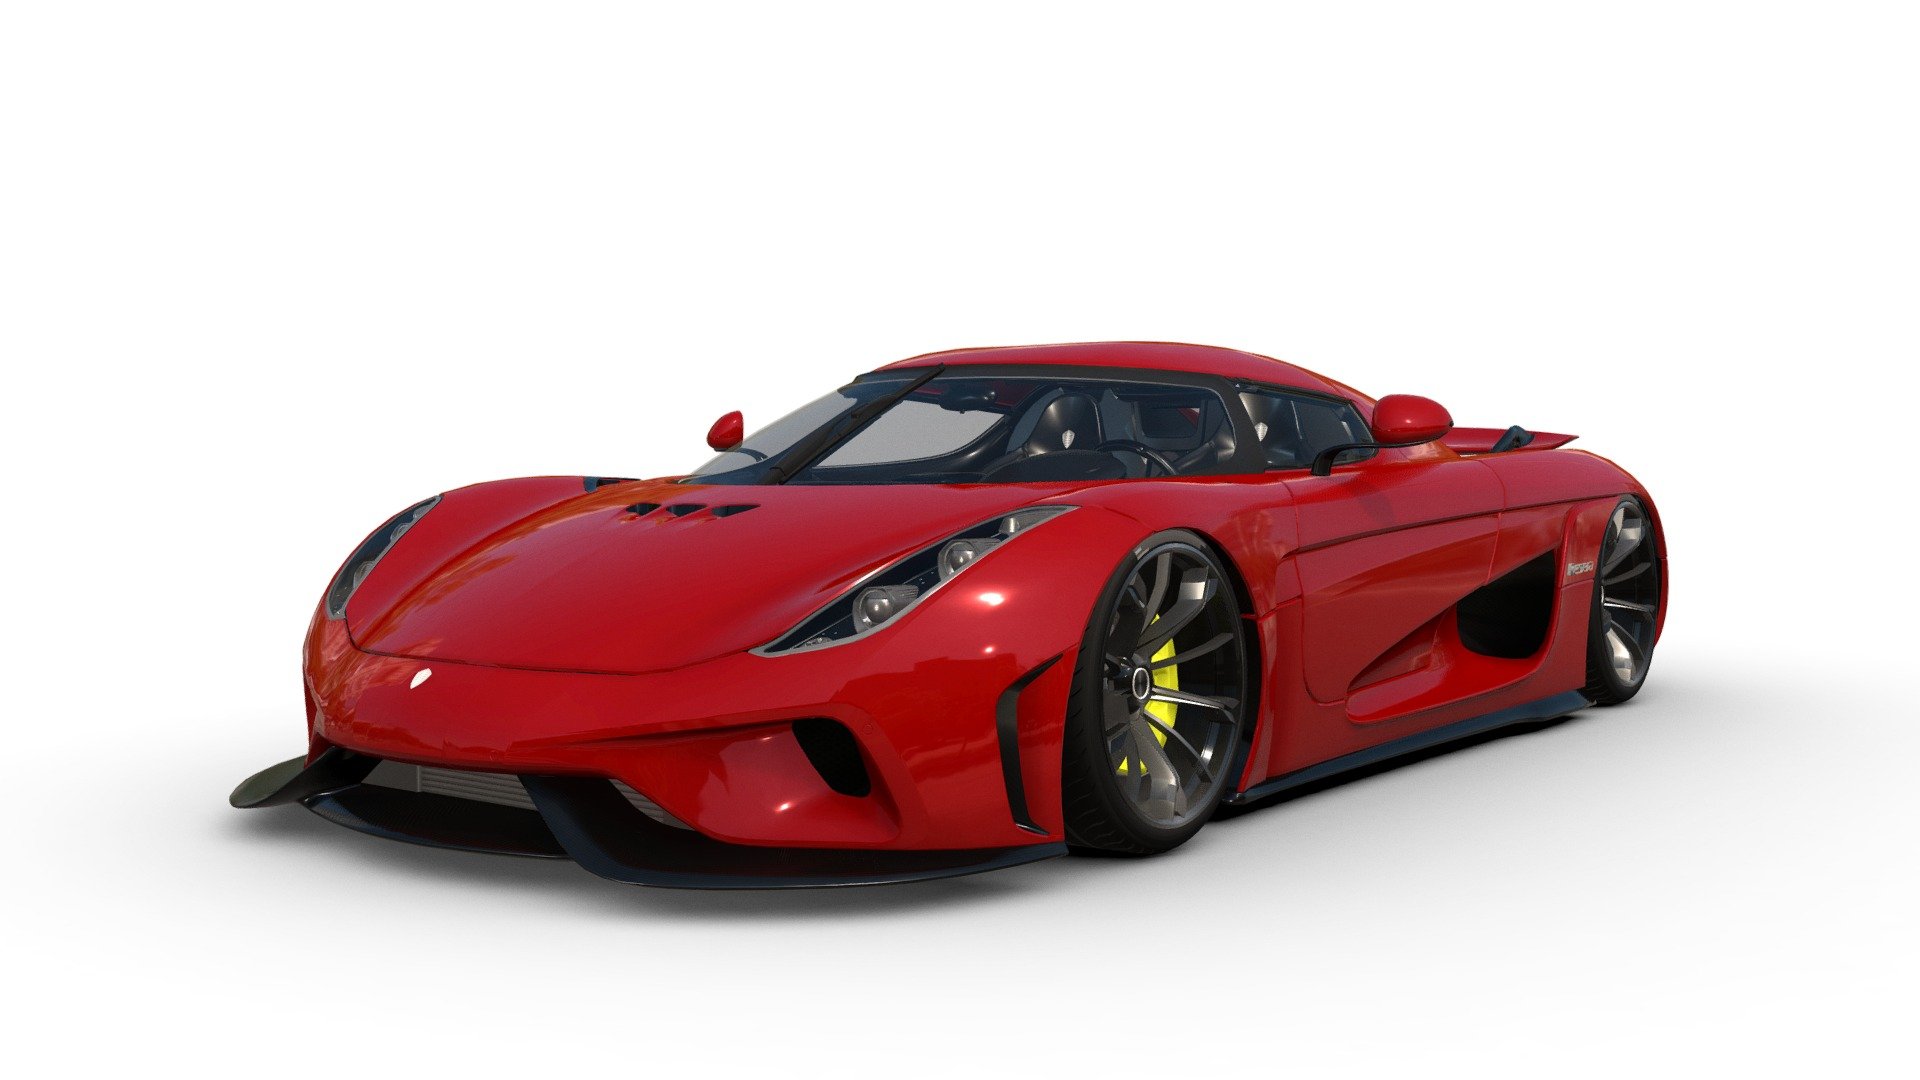 This highly detailed 3D model of the Koenigsegg Regera is a masterpiece of automotive design and engineering. The Koenigsegg Regera is a hybrid hypercar known for its stunning aesthetics and exceptional performance. This 3D model faithfully replicates every curve and detail of the real car, making it a perfect choice for automotive enthusiasts, 3D artists, and designers 3d model